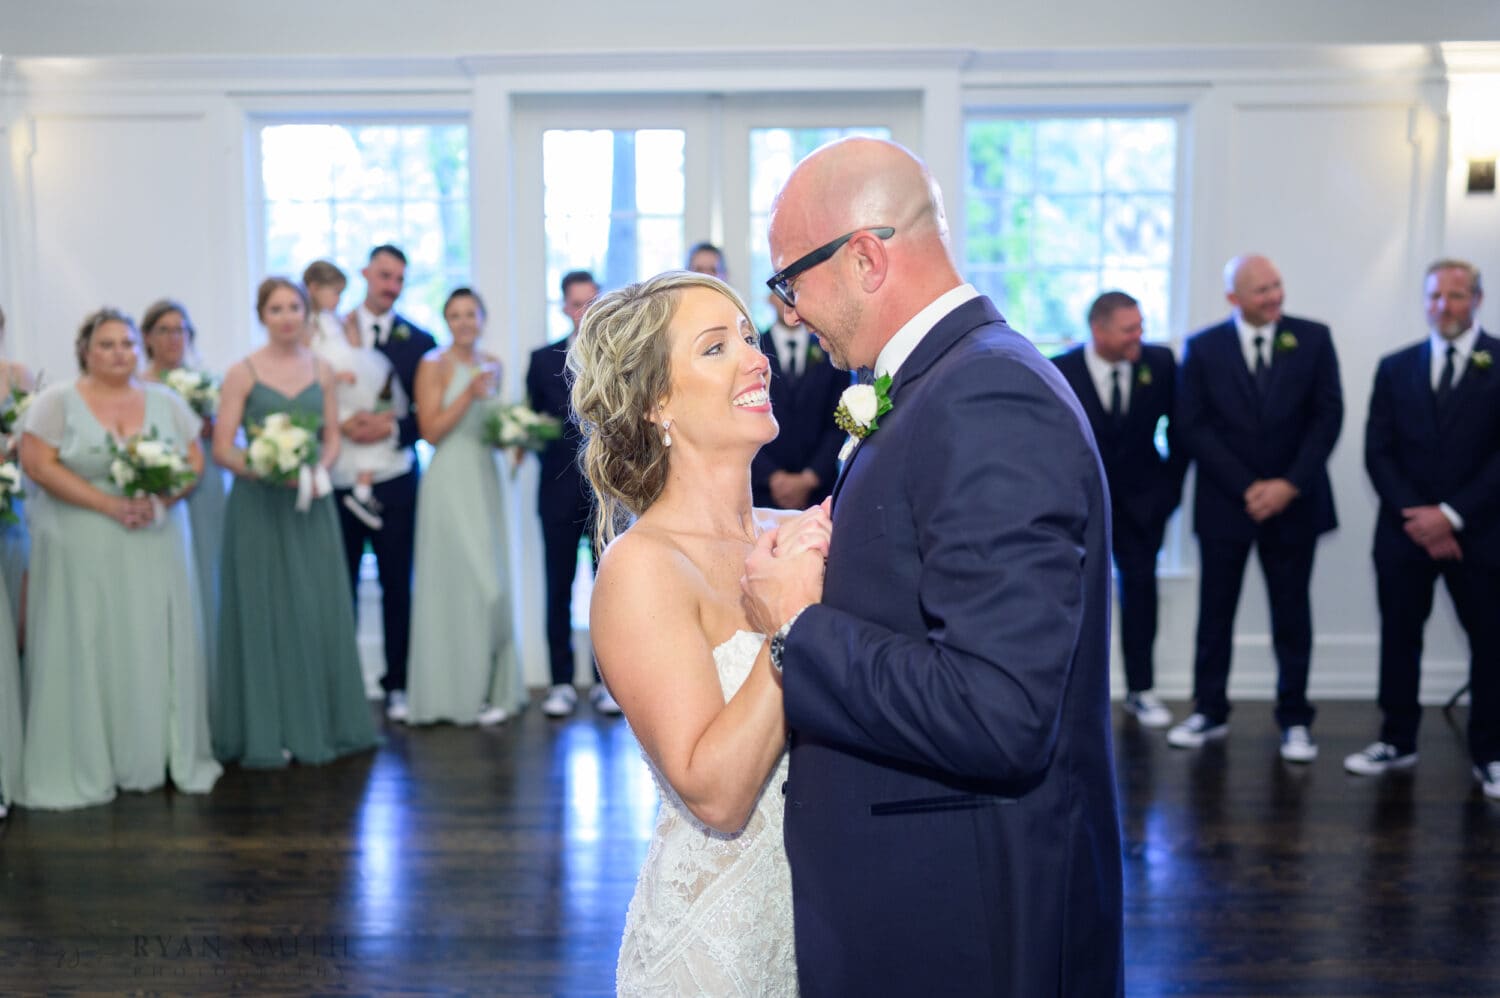 First dance with the bride and groom - The Village House at Litchfield